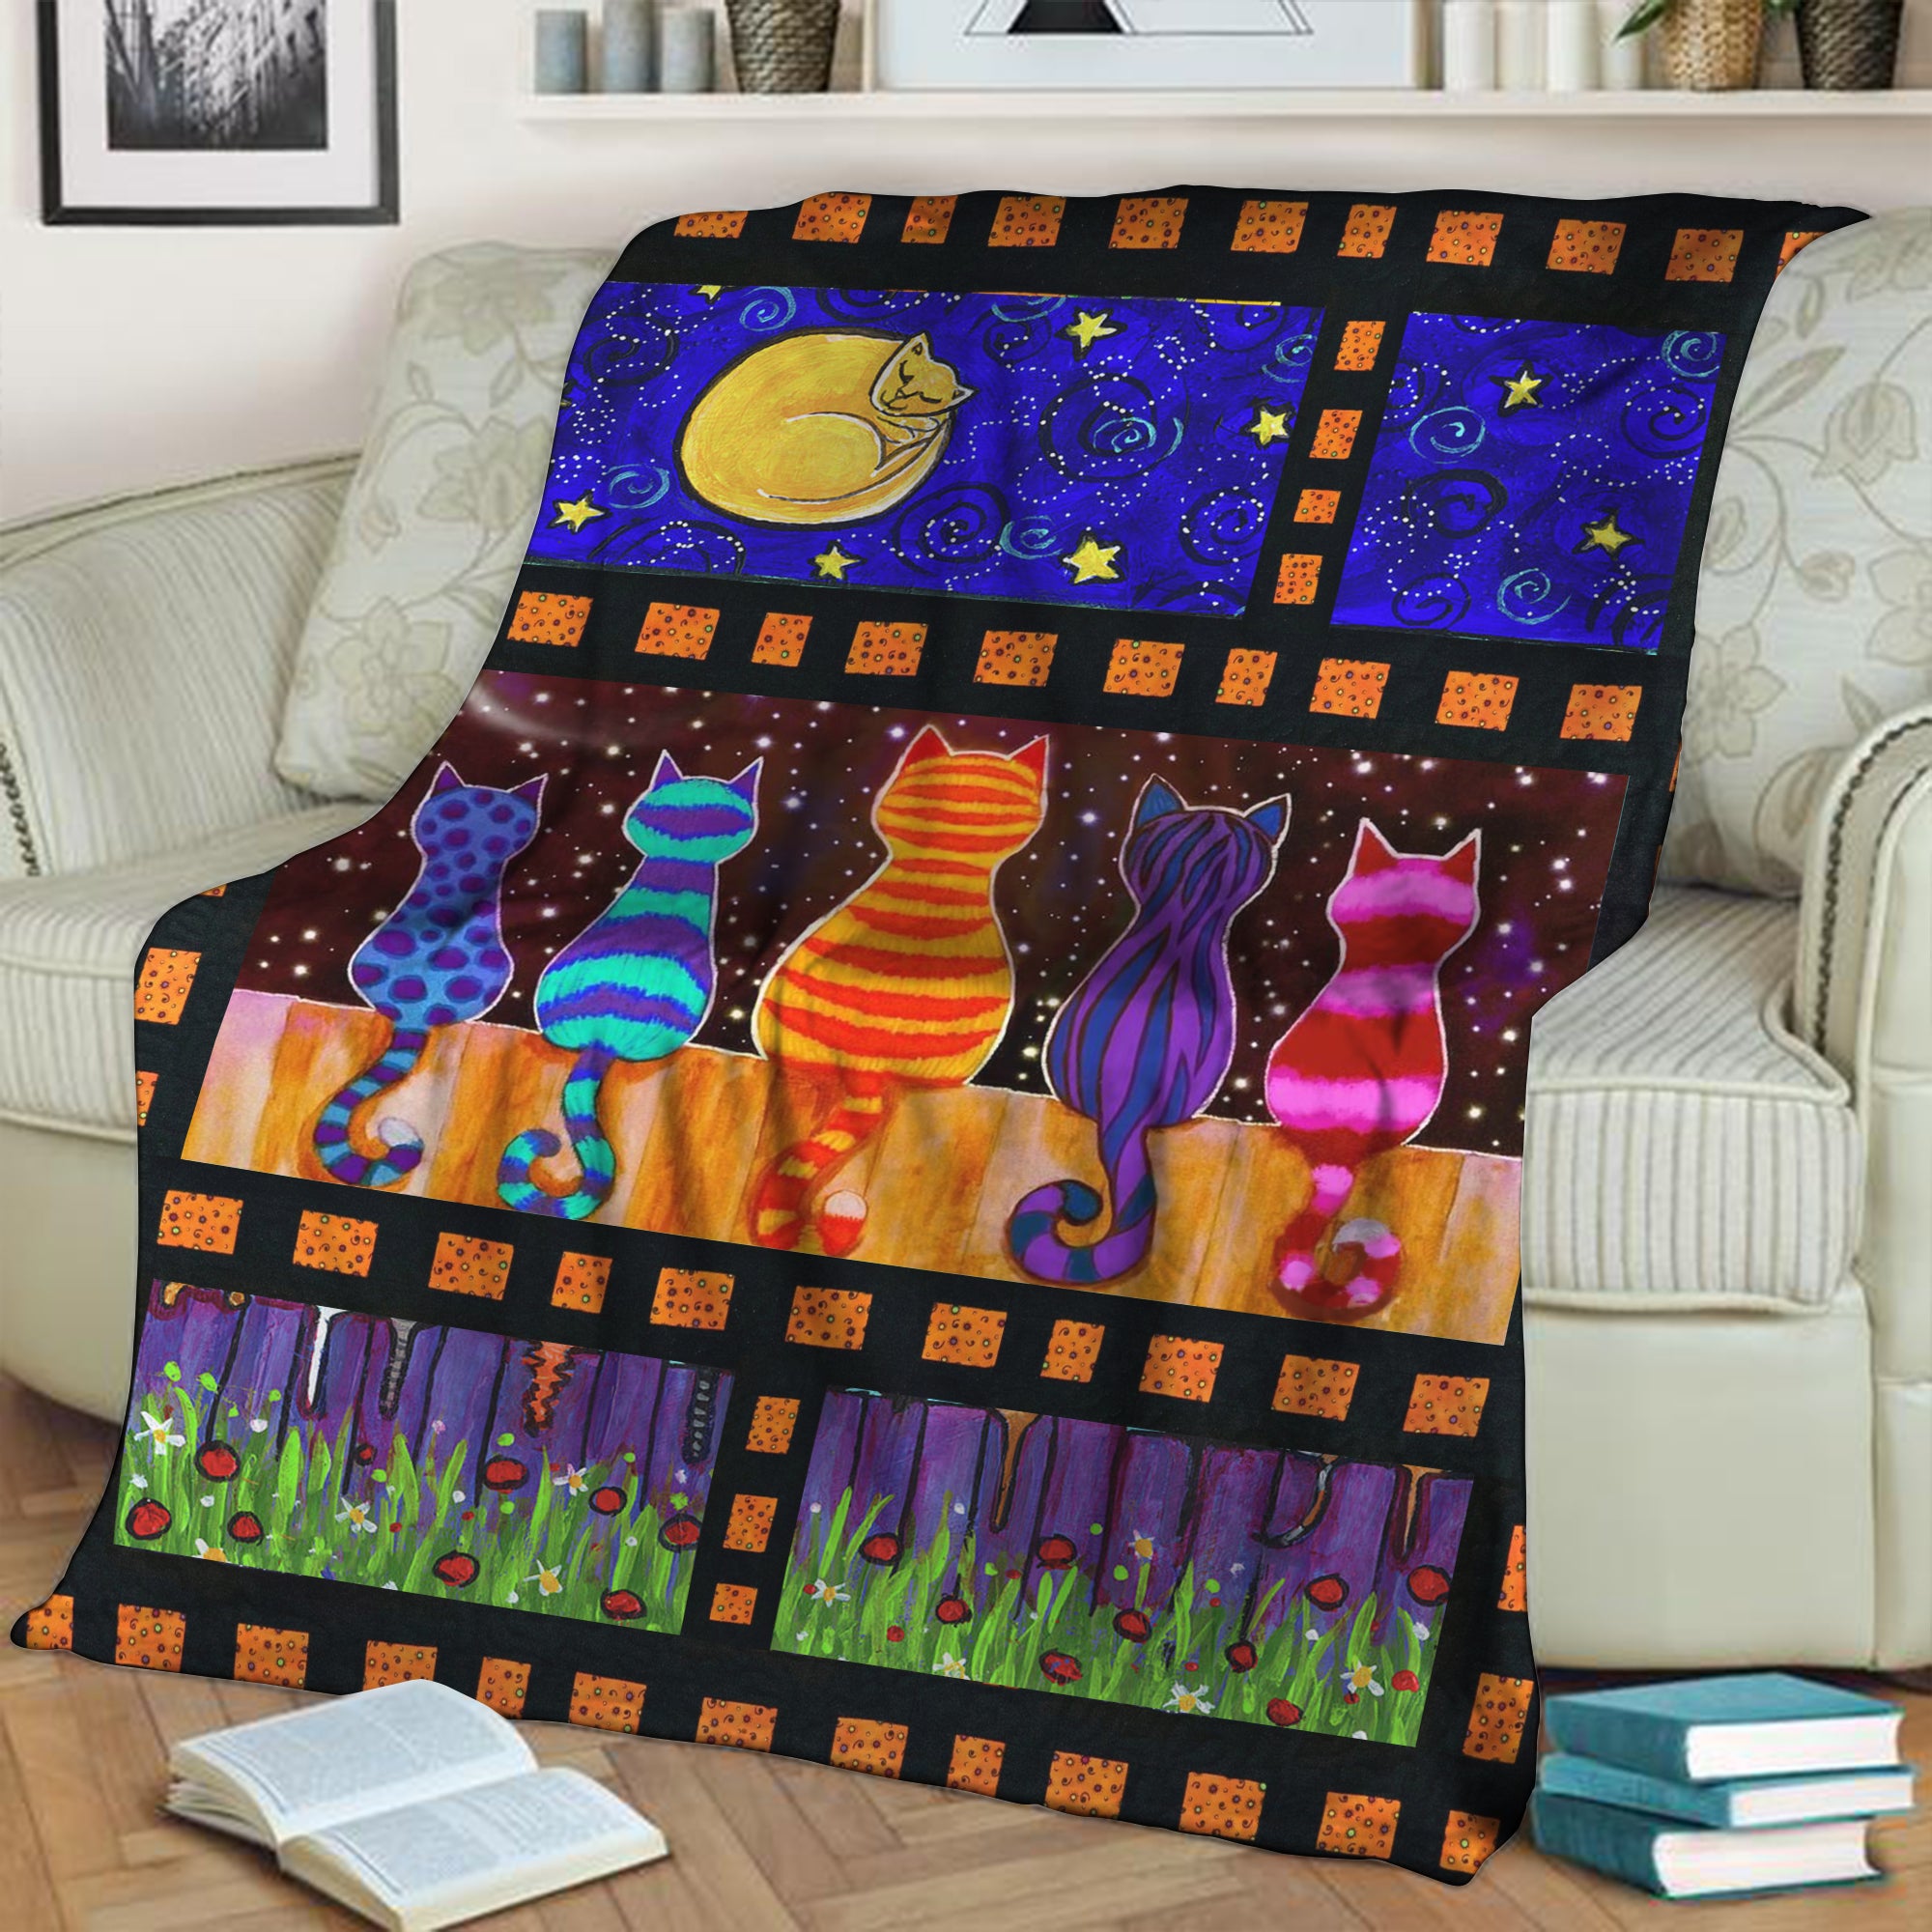 Cats In The Galaxy 3D Throw Blanket 150cm x 200cm  